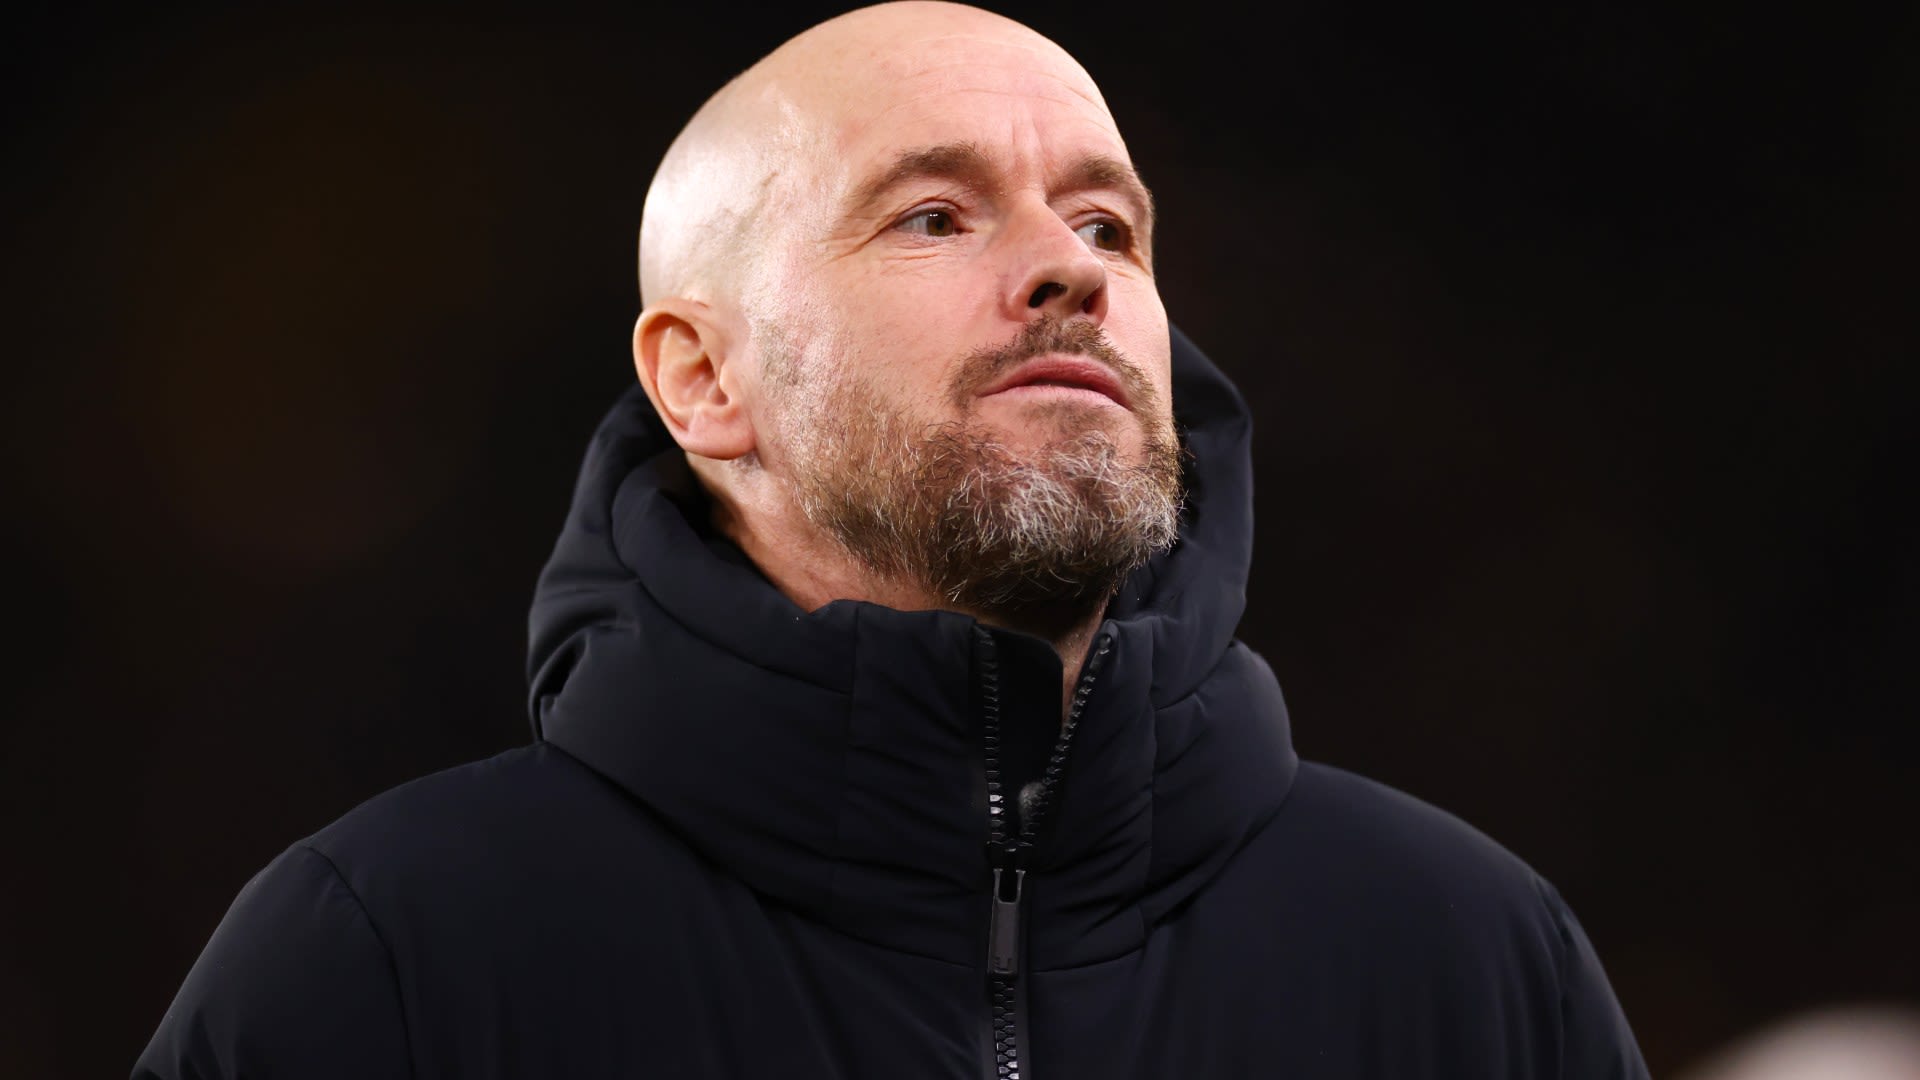 Ten Hag 'could choose to QUIT Man Utd' and would have job waiting for him